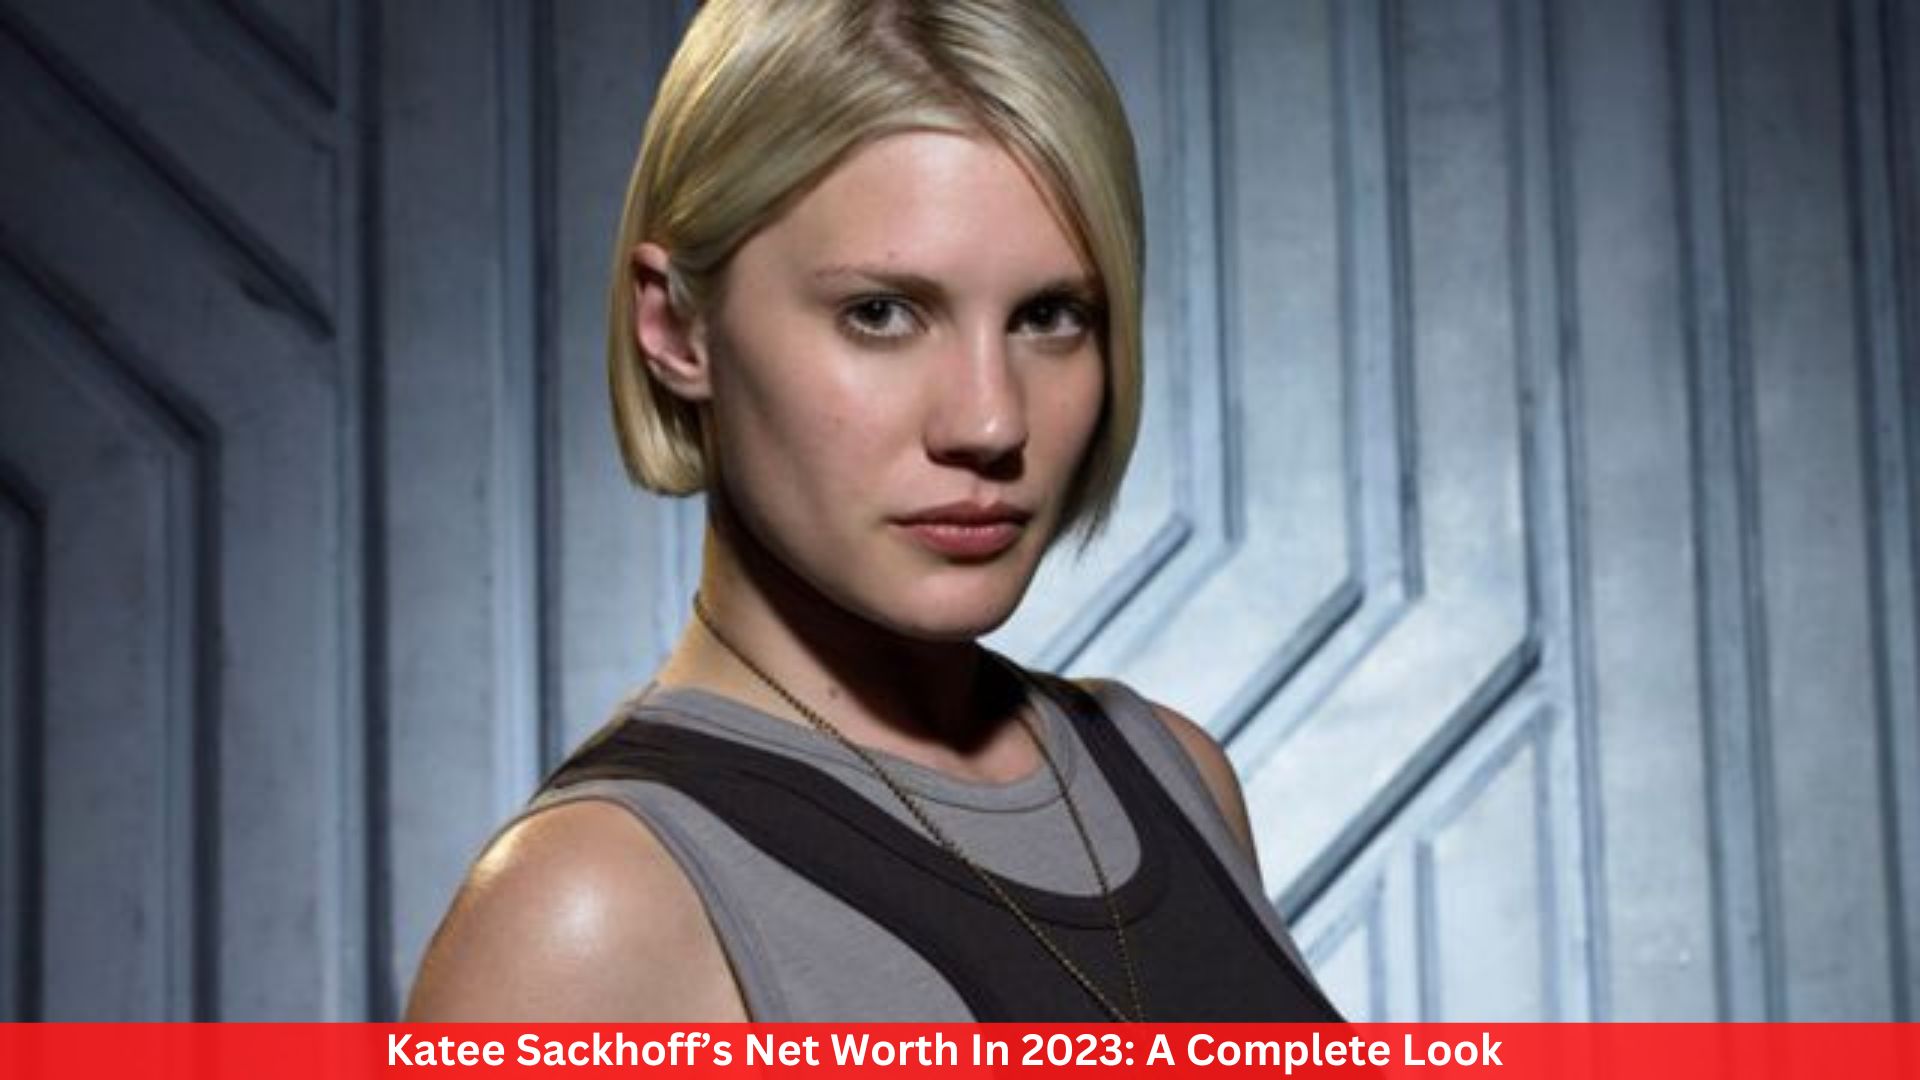 Katee Sackhoff’s Net Worth In 2023: A Complete Look